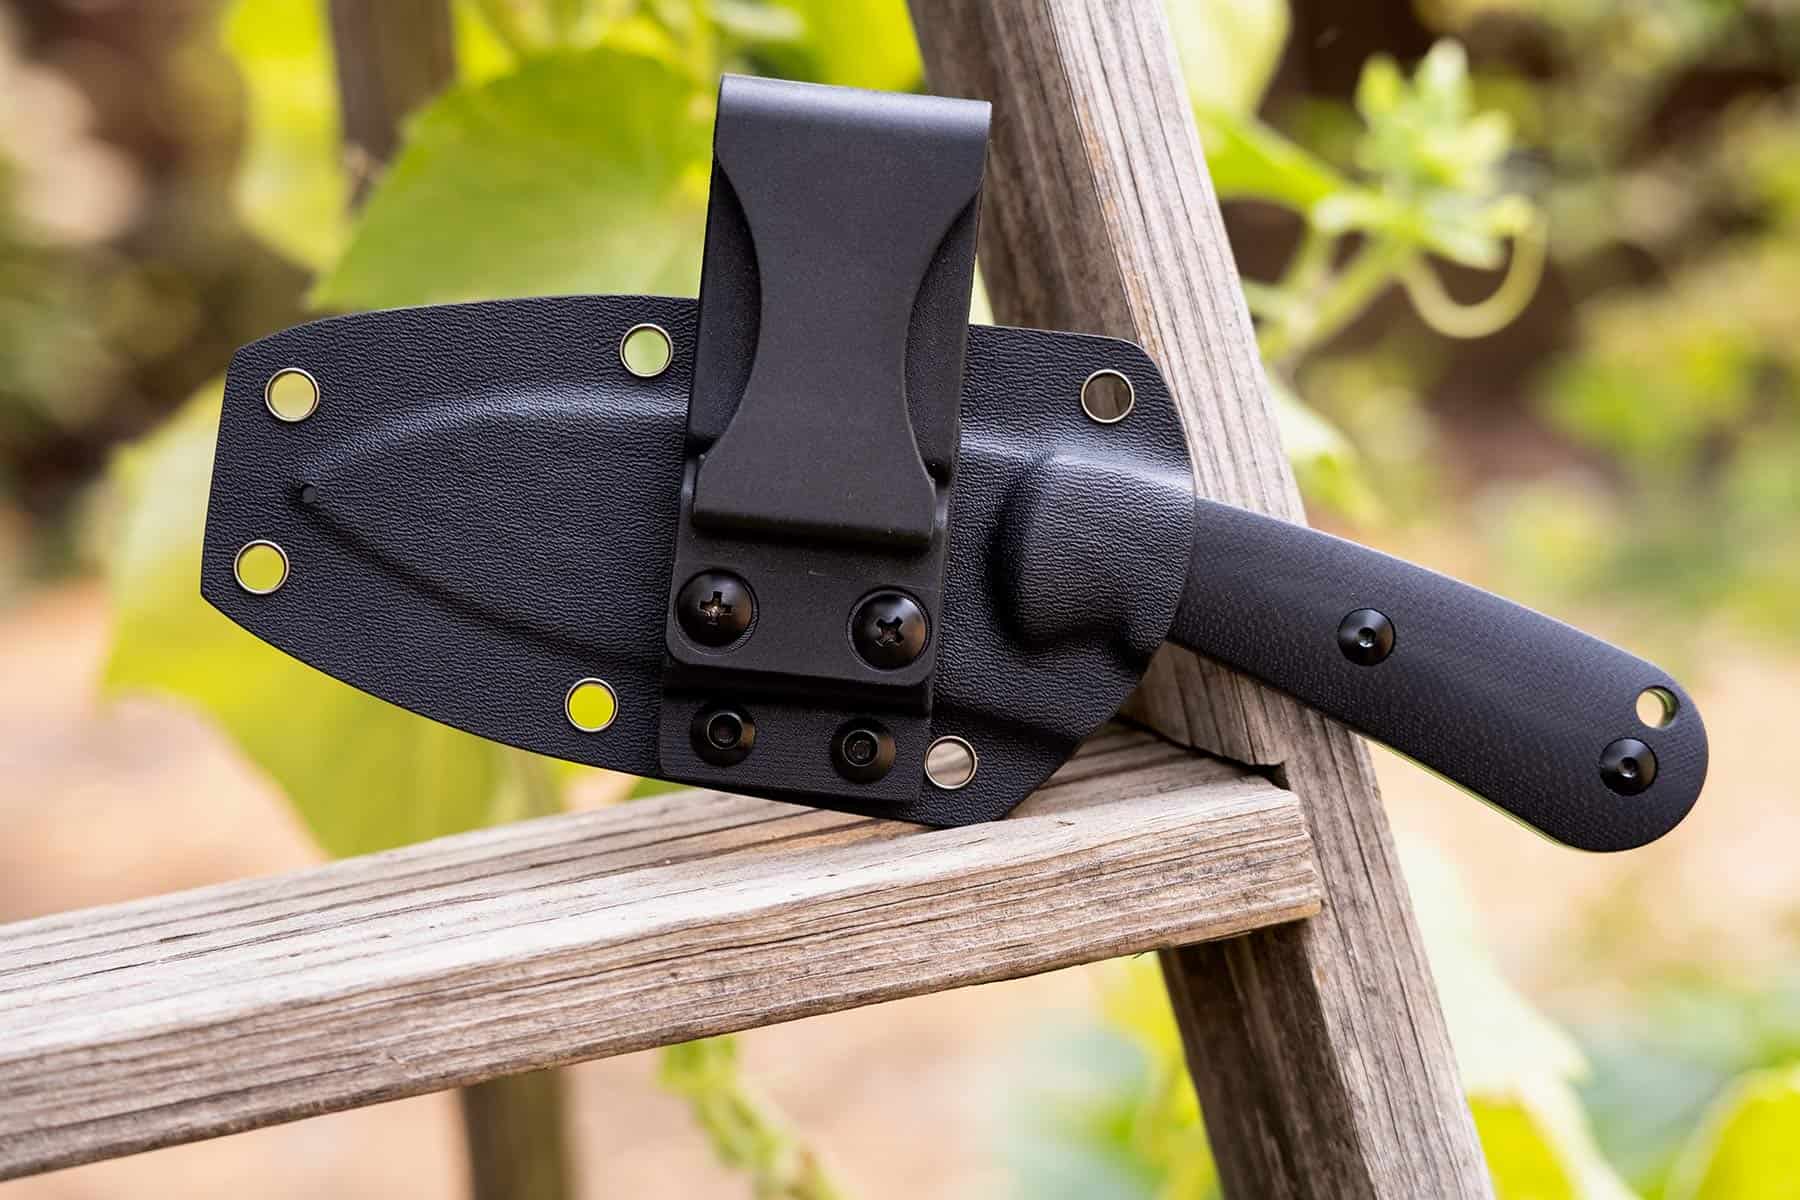 A close-up of Kizer Azo Baby sheath that shows it is adjustable